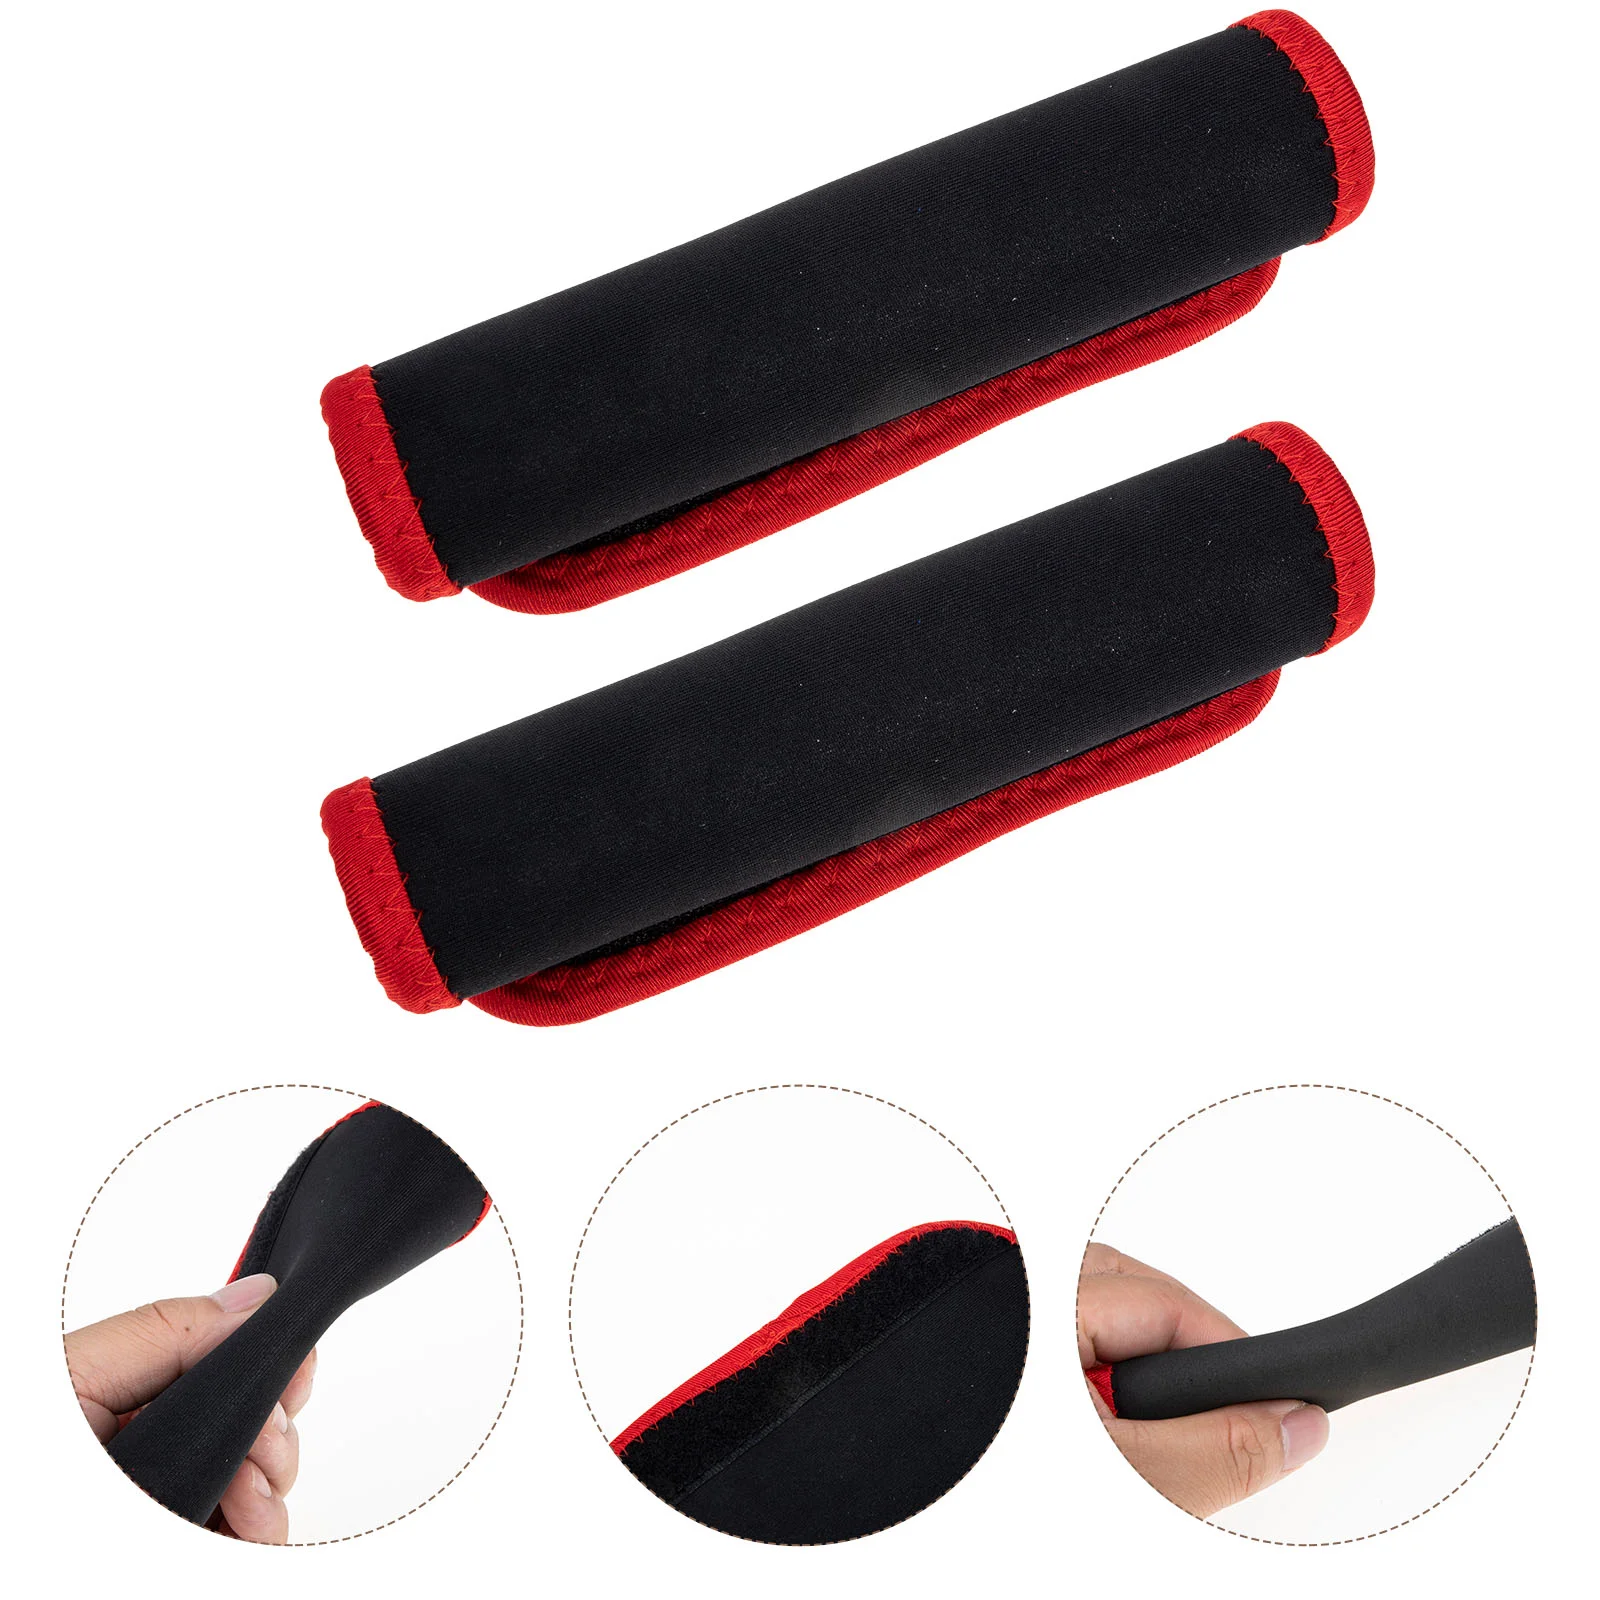 

2Pcs Exercise Palm Pads Workout Grips Neoprene Grip Pads Practical Weightlifting Grips Pads